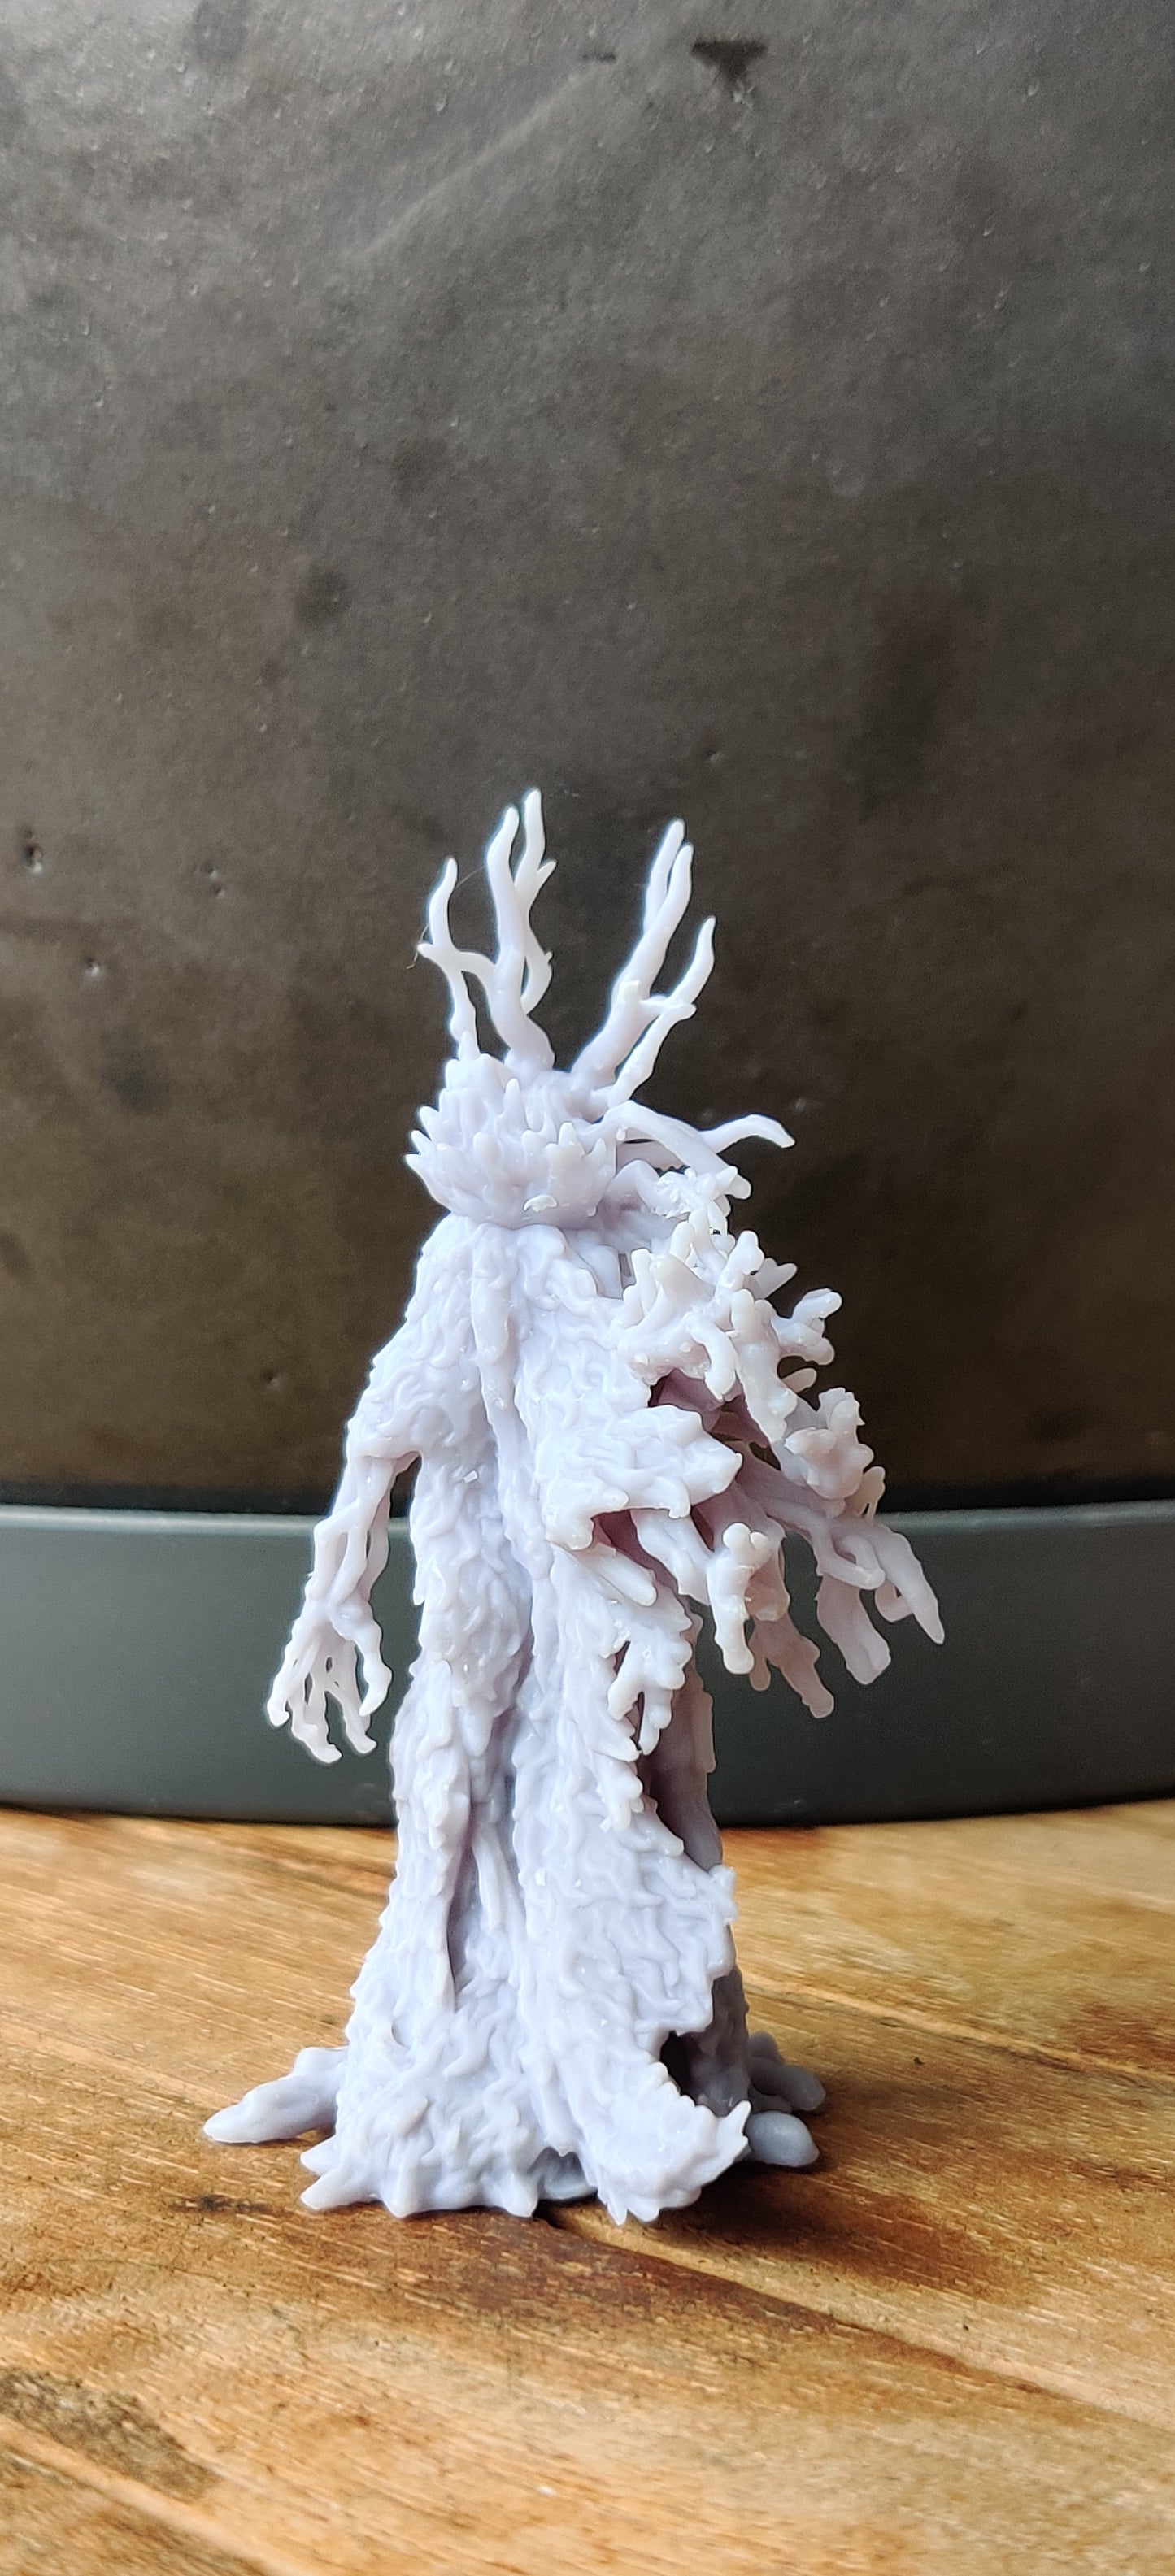 3D printed Lord of the roots mini